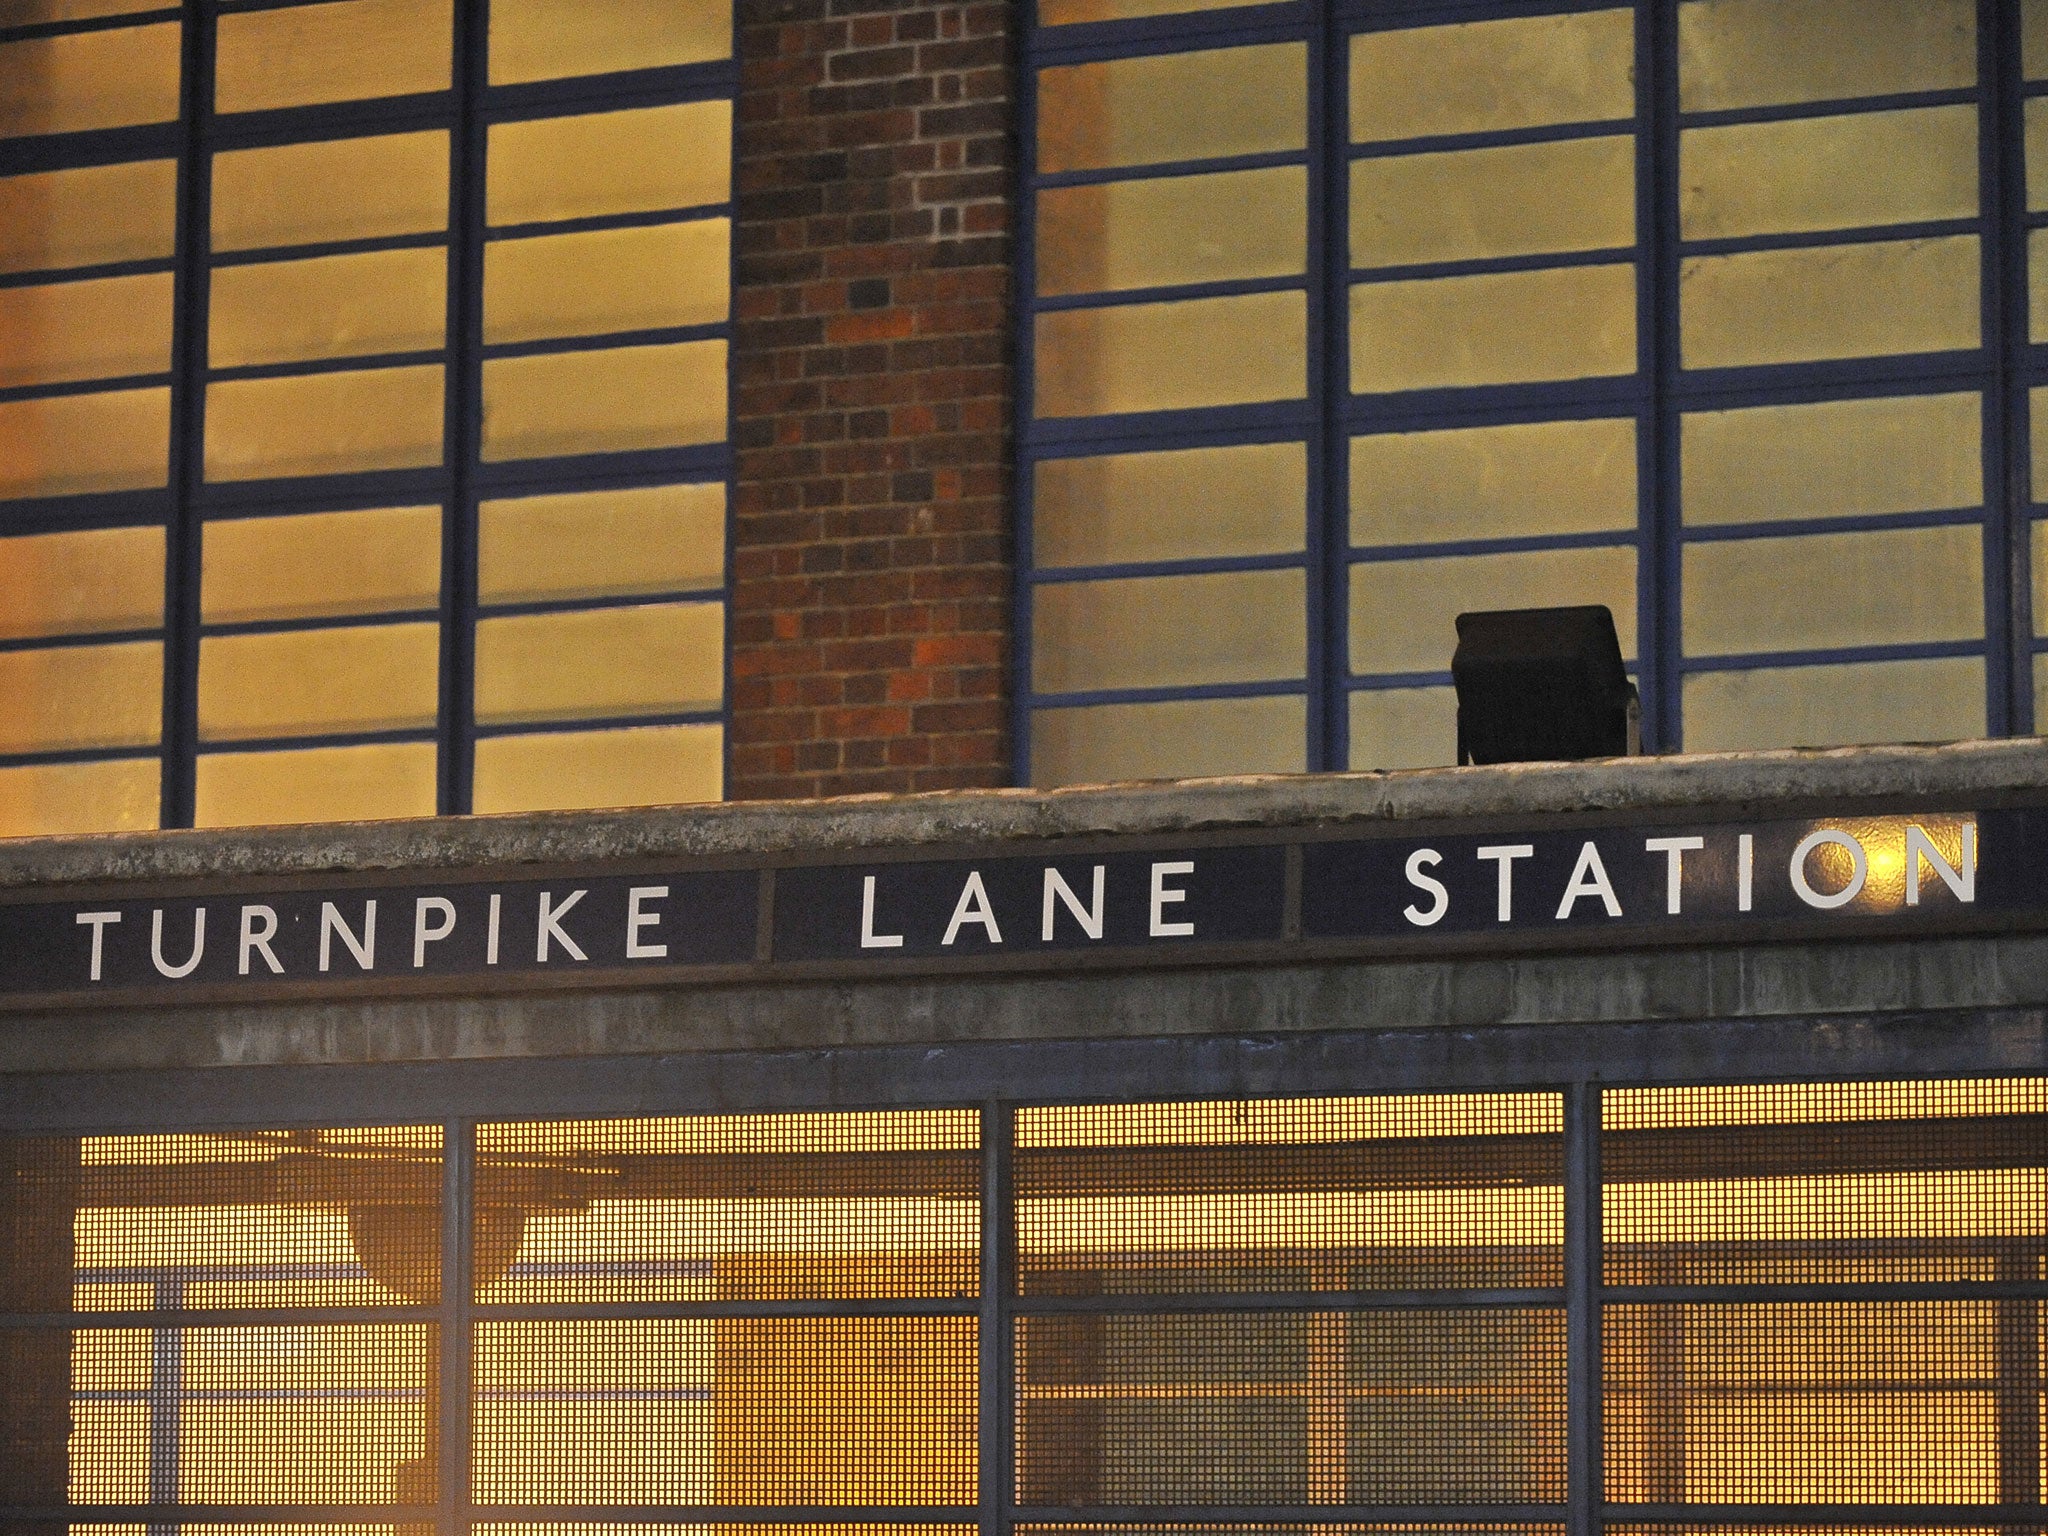 The alleged attack took place on a tube platform at Turnpike Lane station in north London